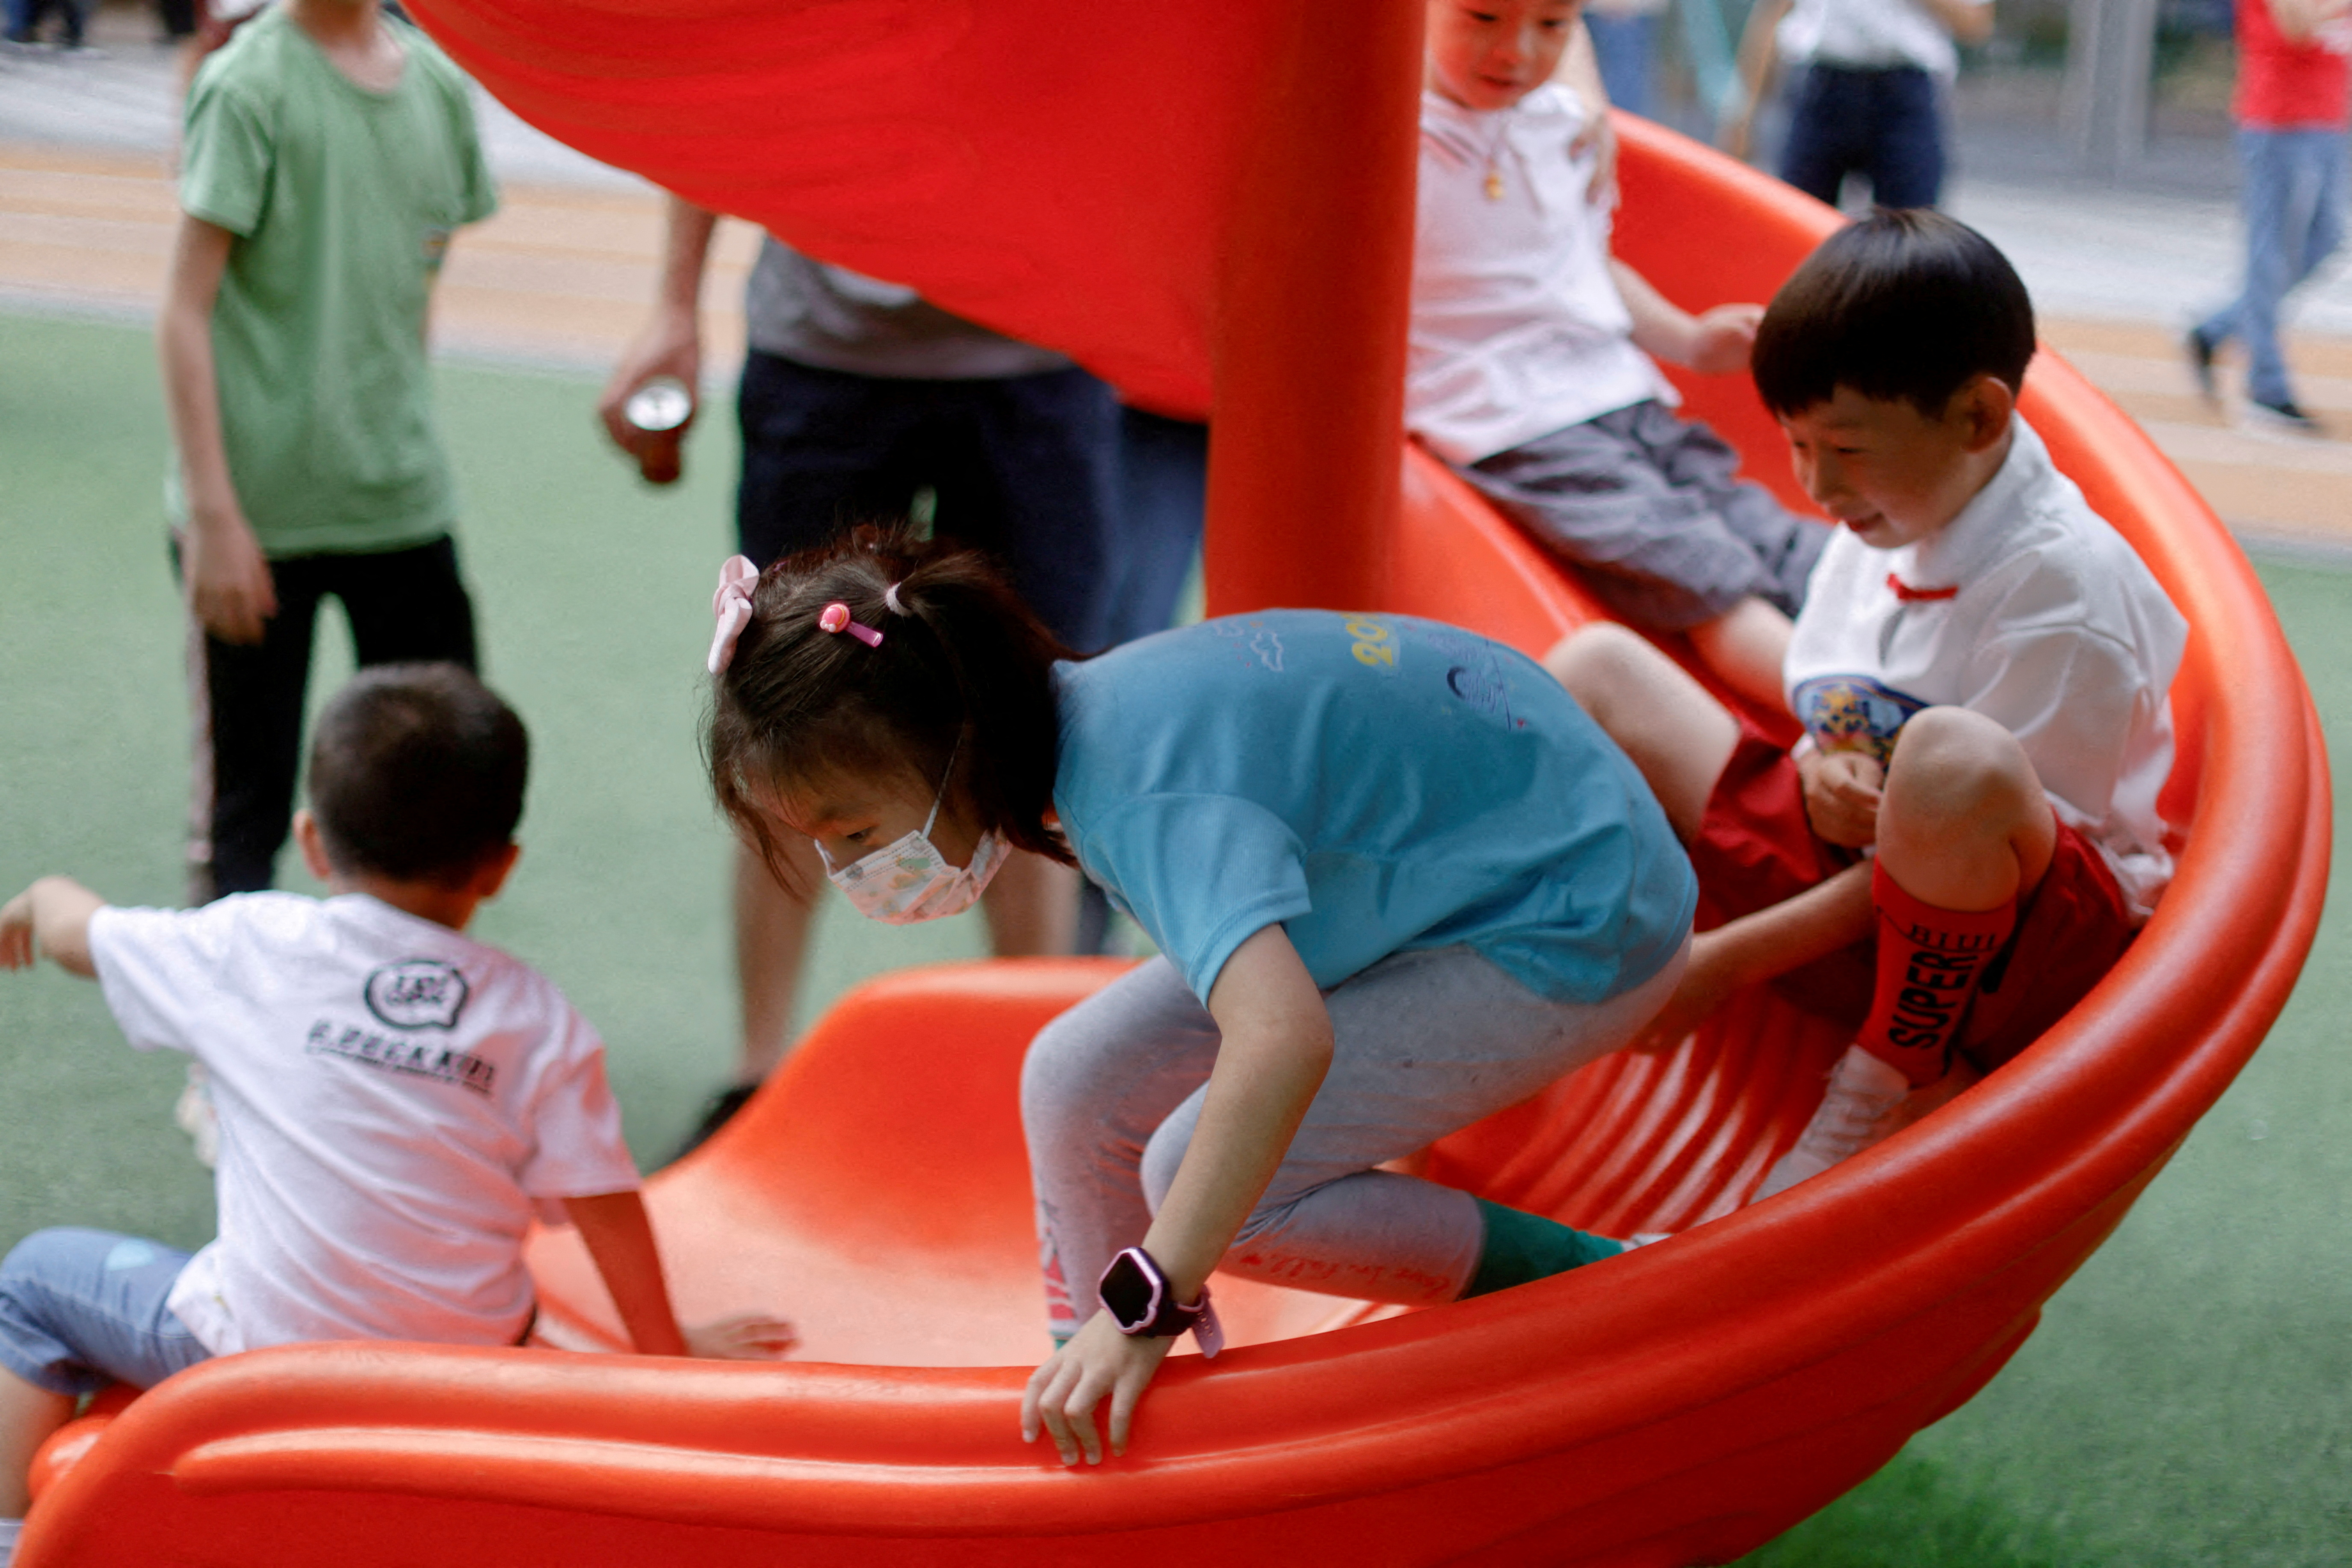 Children at a playground inside a shopping complex in Shanghai